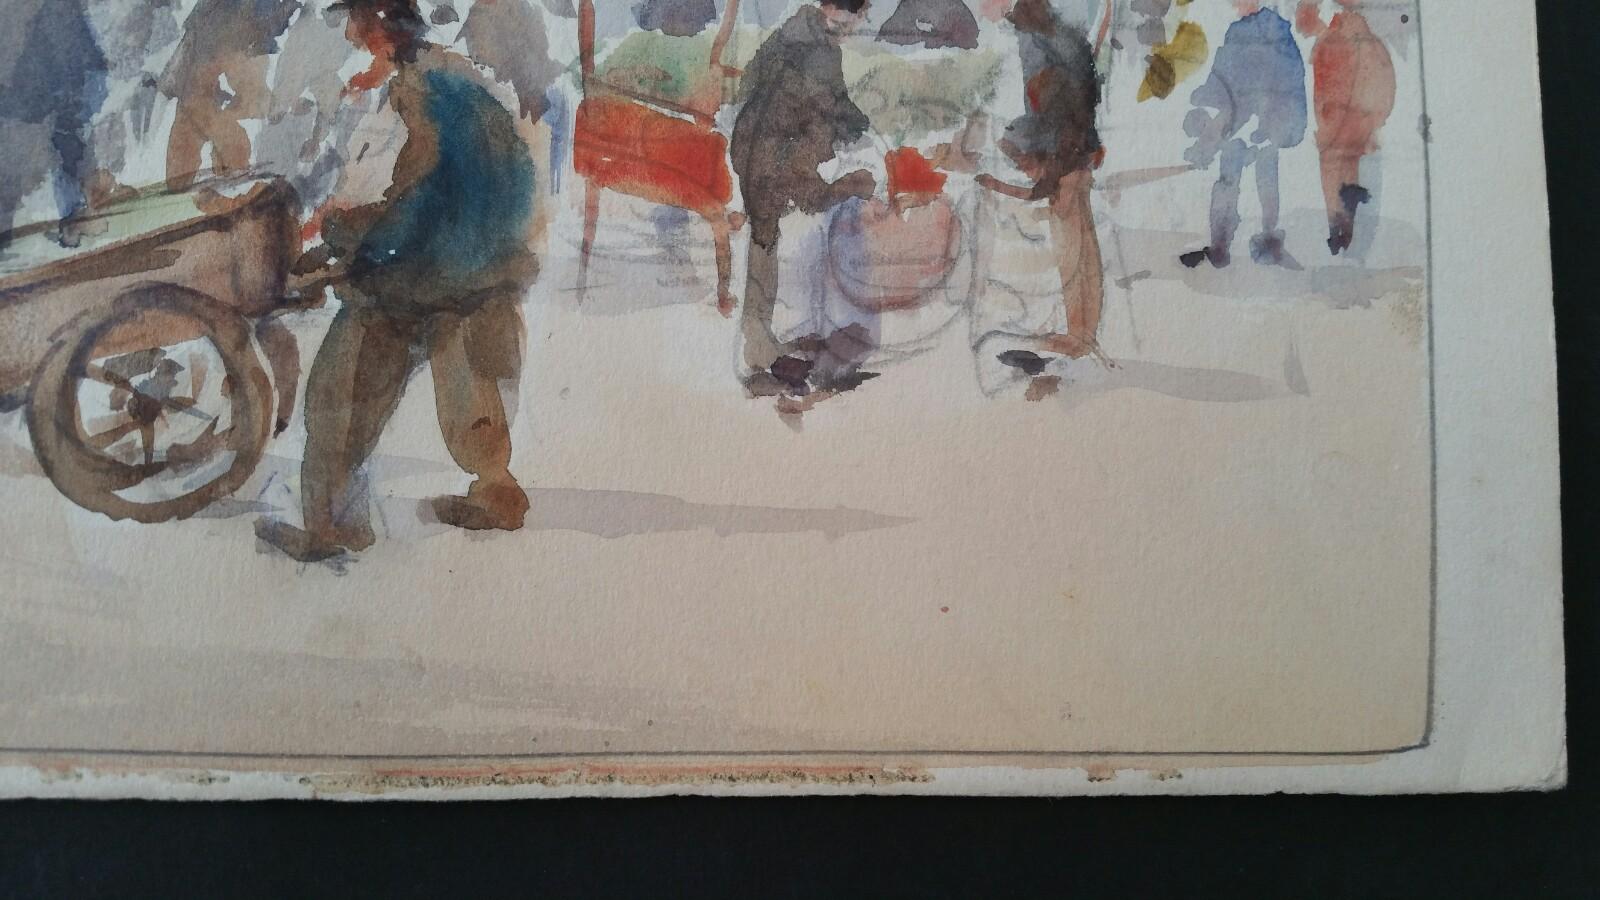 Belgium. Brussels - A Market Lottery Seller
by Leonard Machin Rowe (1880-1968)
signed, dated and inscribed front lower left corner, inscribed and signed to the back
watercolour painting on artist's paper, unframed

Image 9.75 x 13.75 inches, sheet